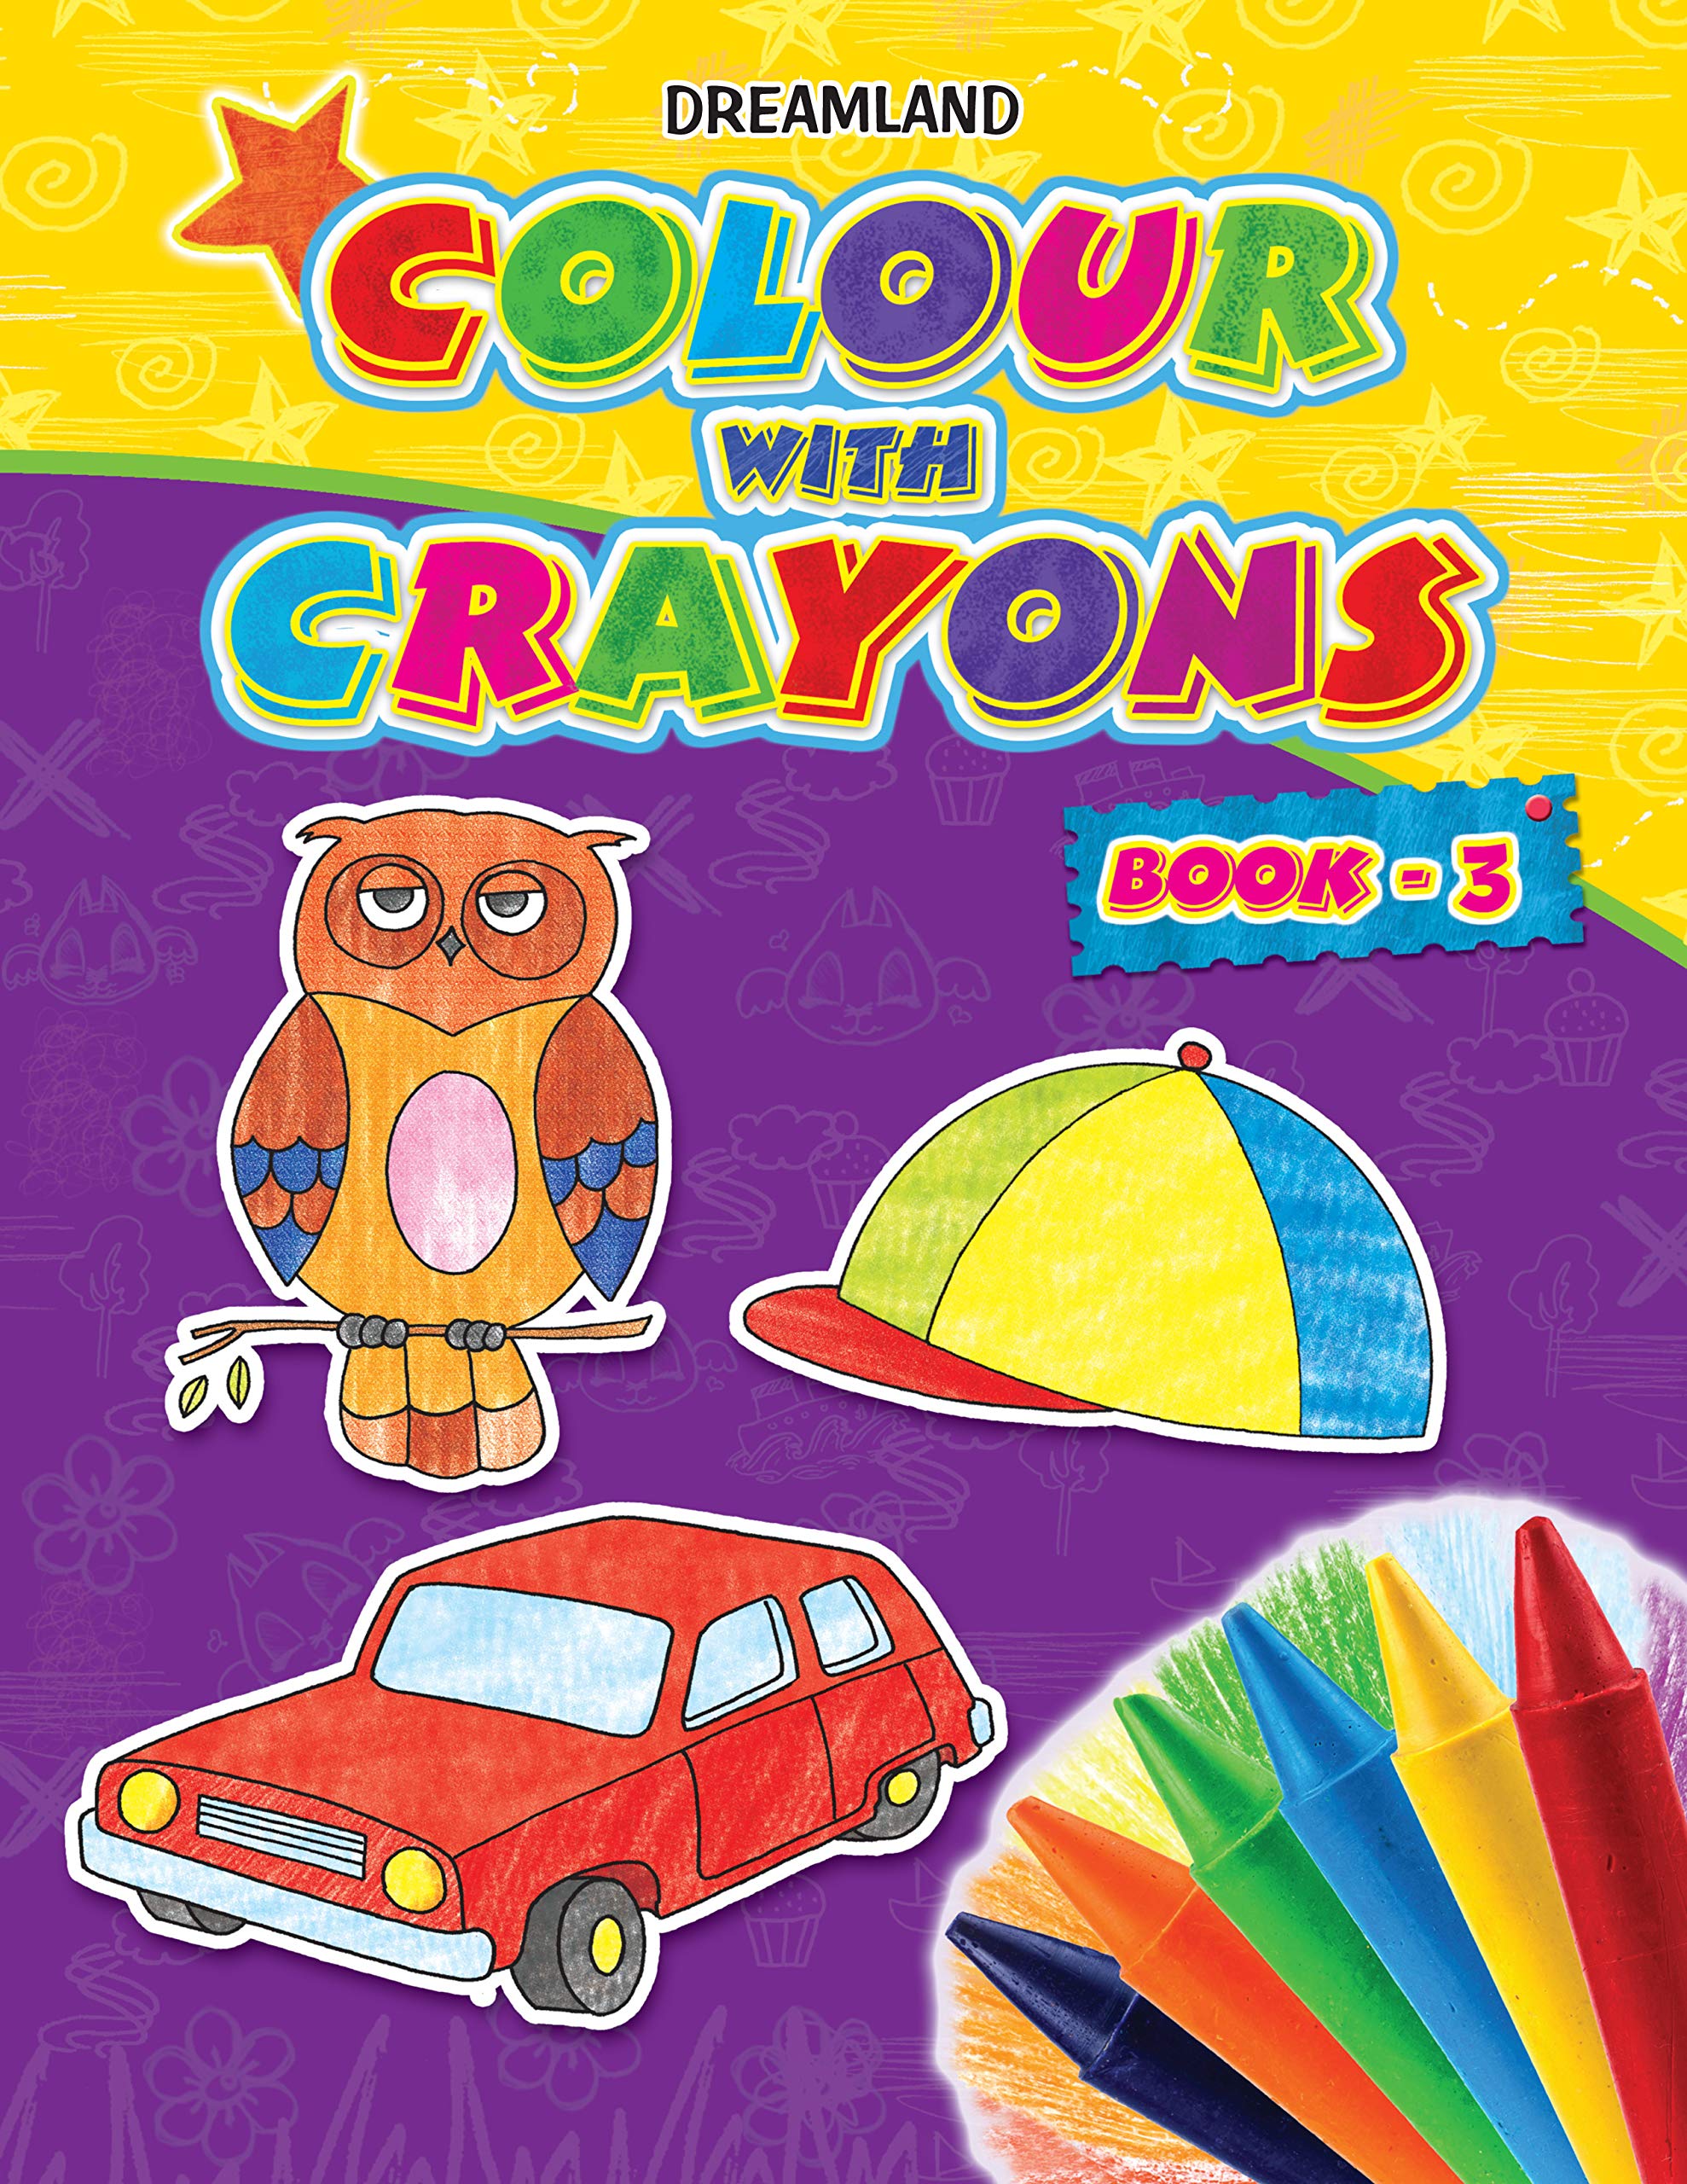 Colour with Crayons Part - 3 